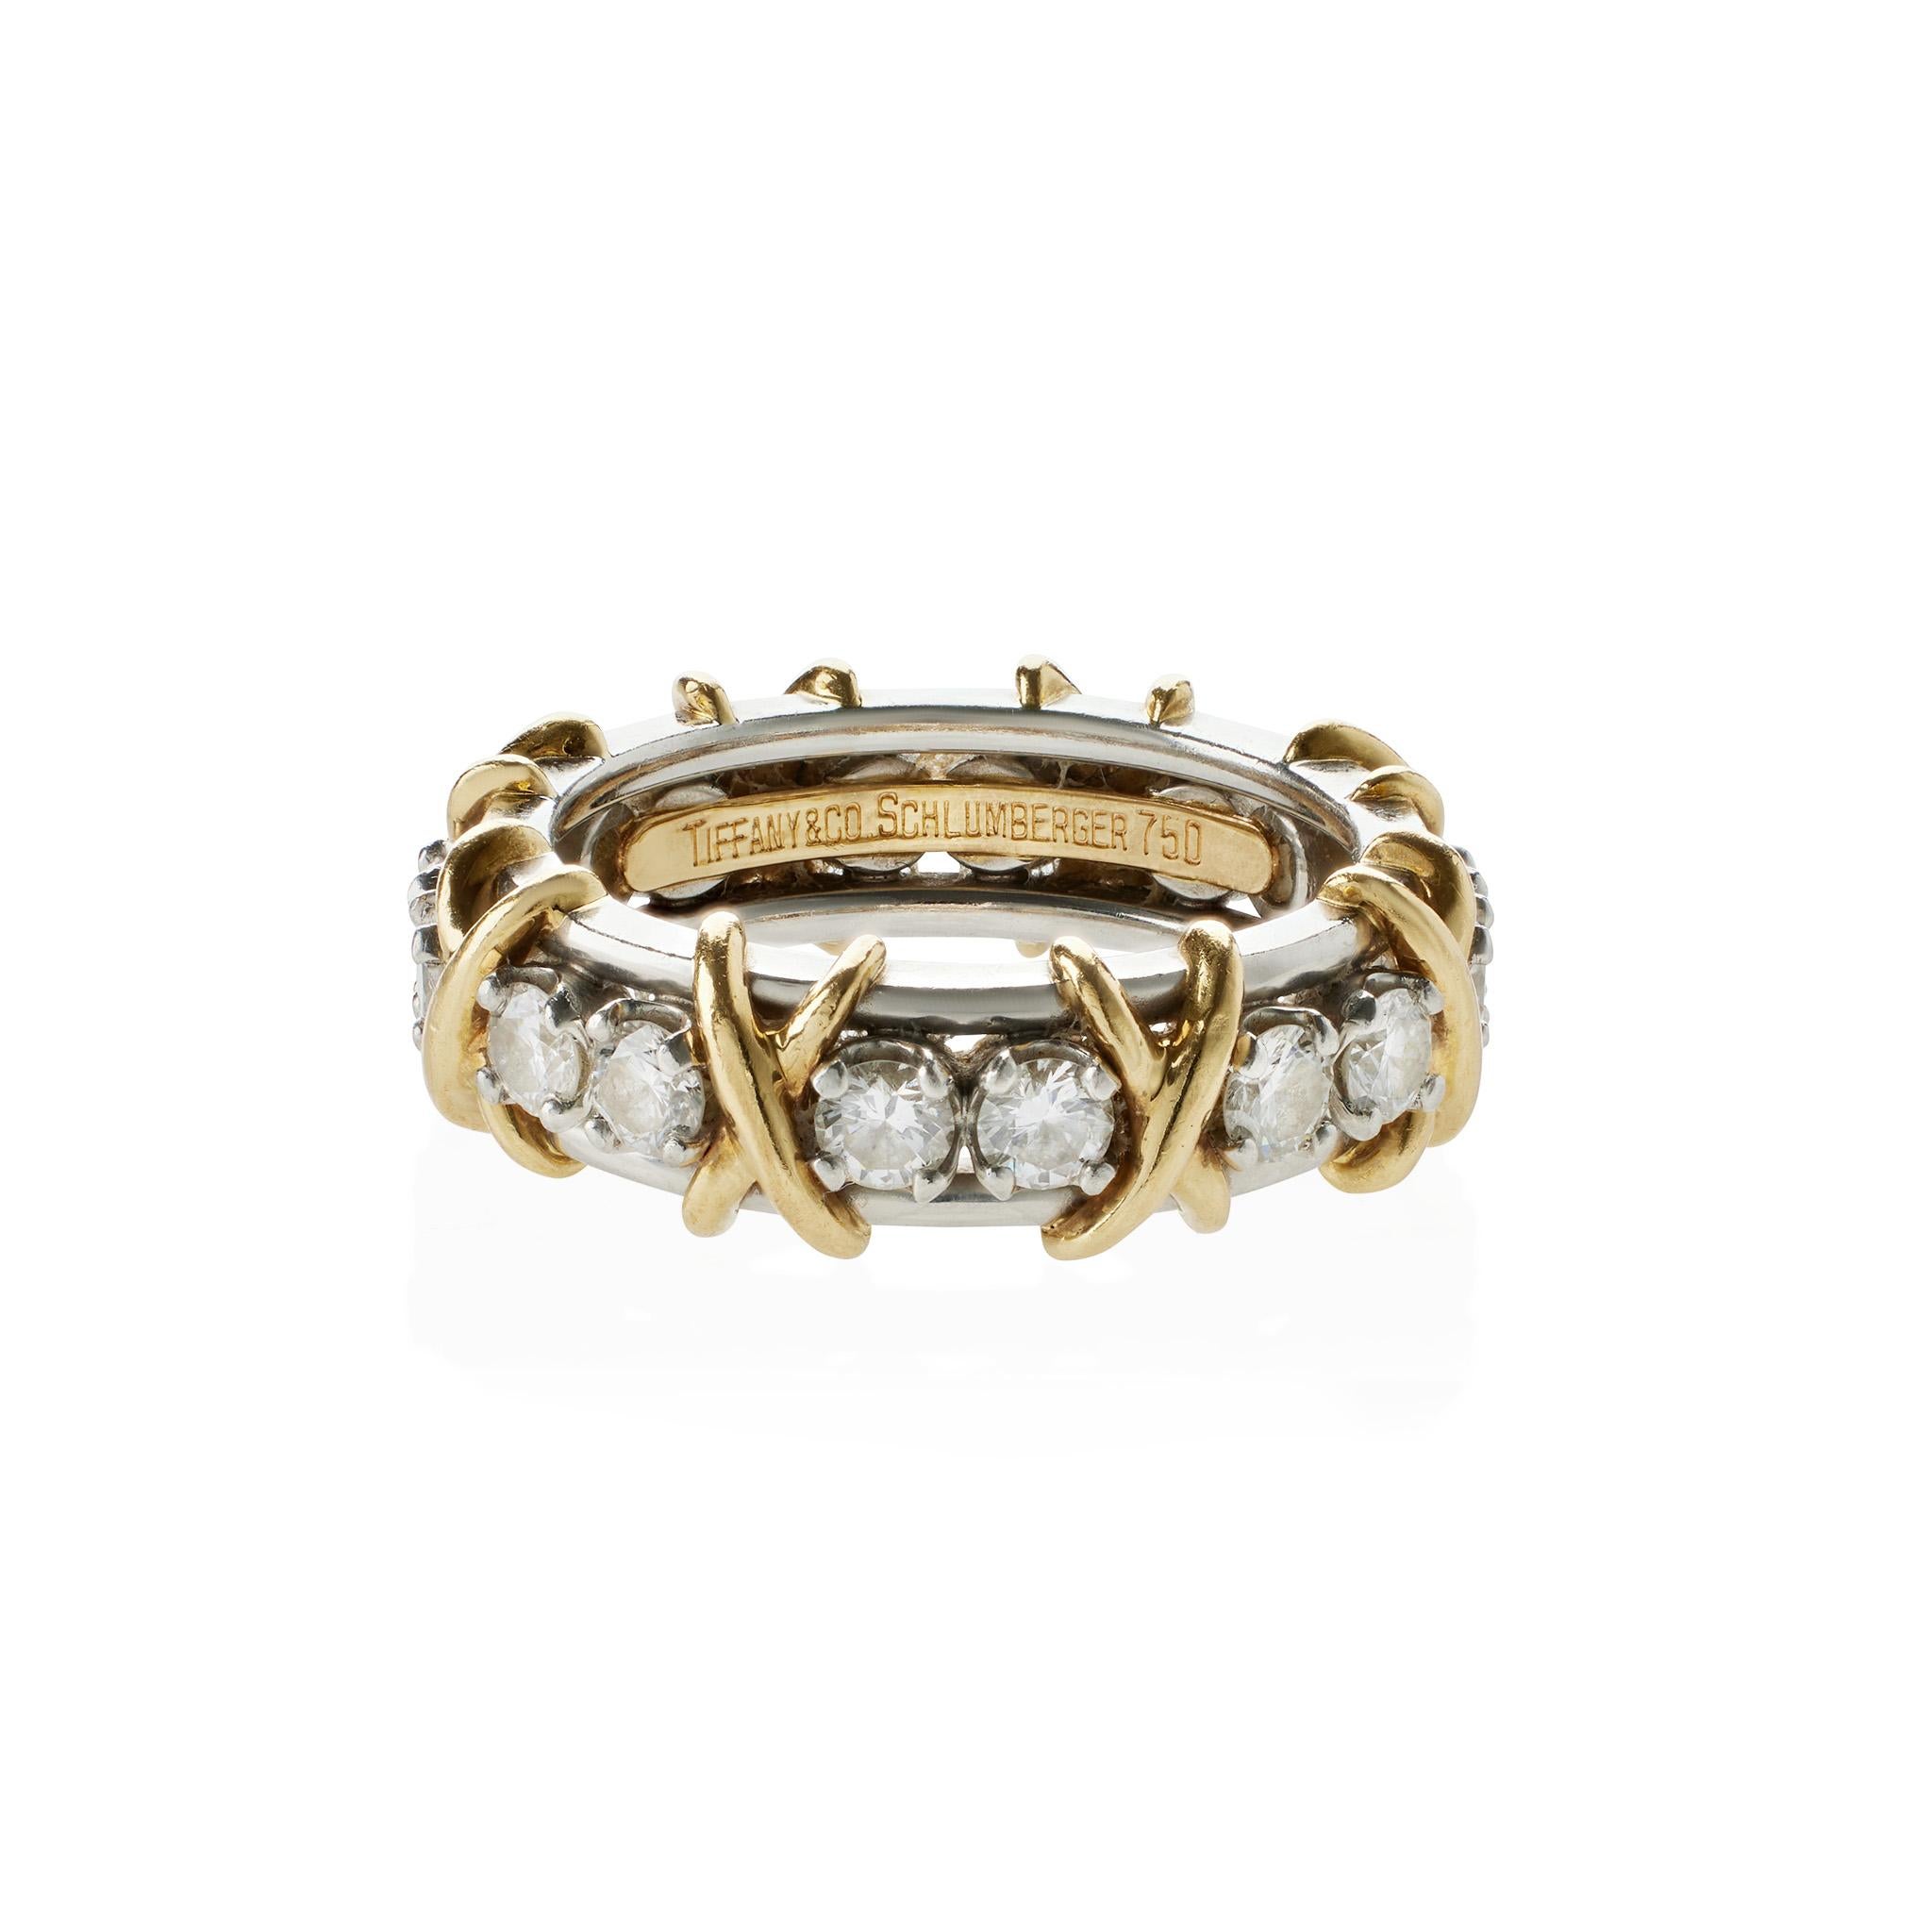 This Tiffany & Co. bi-color 18K gold diamond Sixteen Stone Ring was designed by Jean Schlumberger dates from the late 20th century. The ring is set with pairs of round brilliant-cut diamonds interspersed with yellow gold X motifs joining double